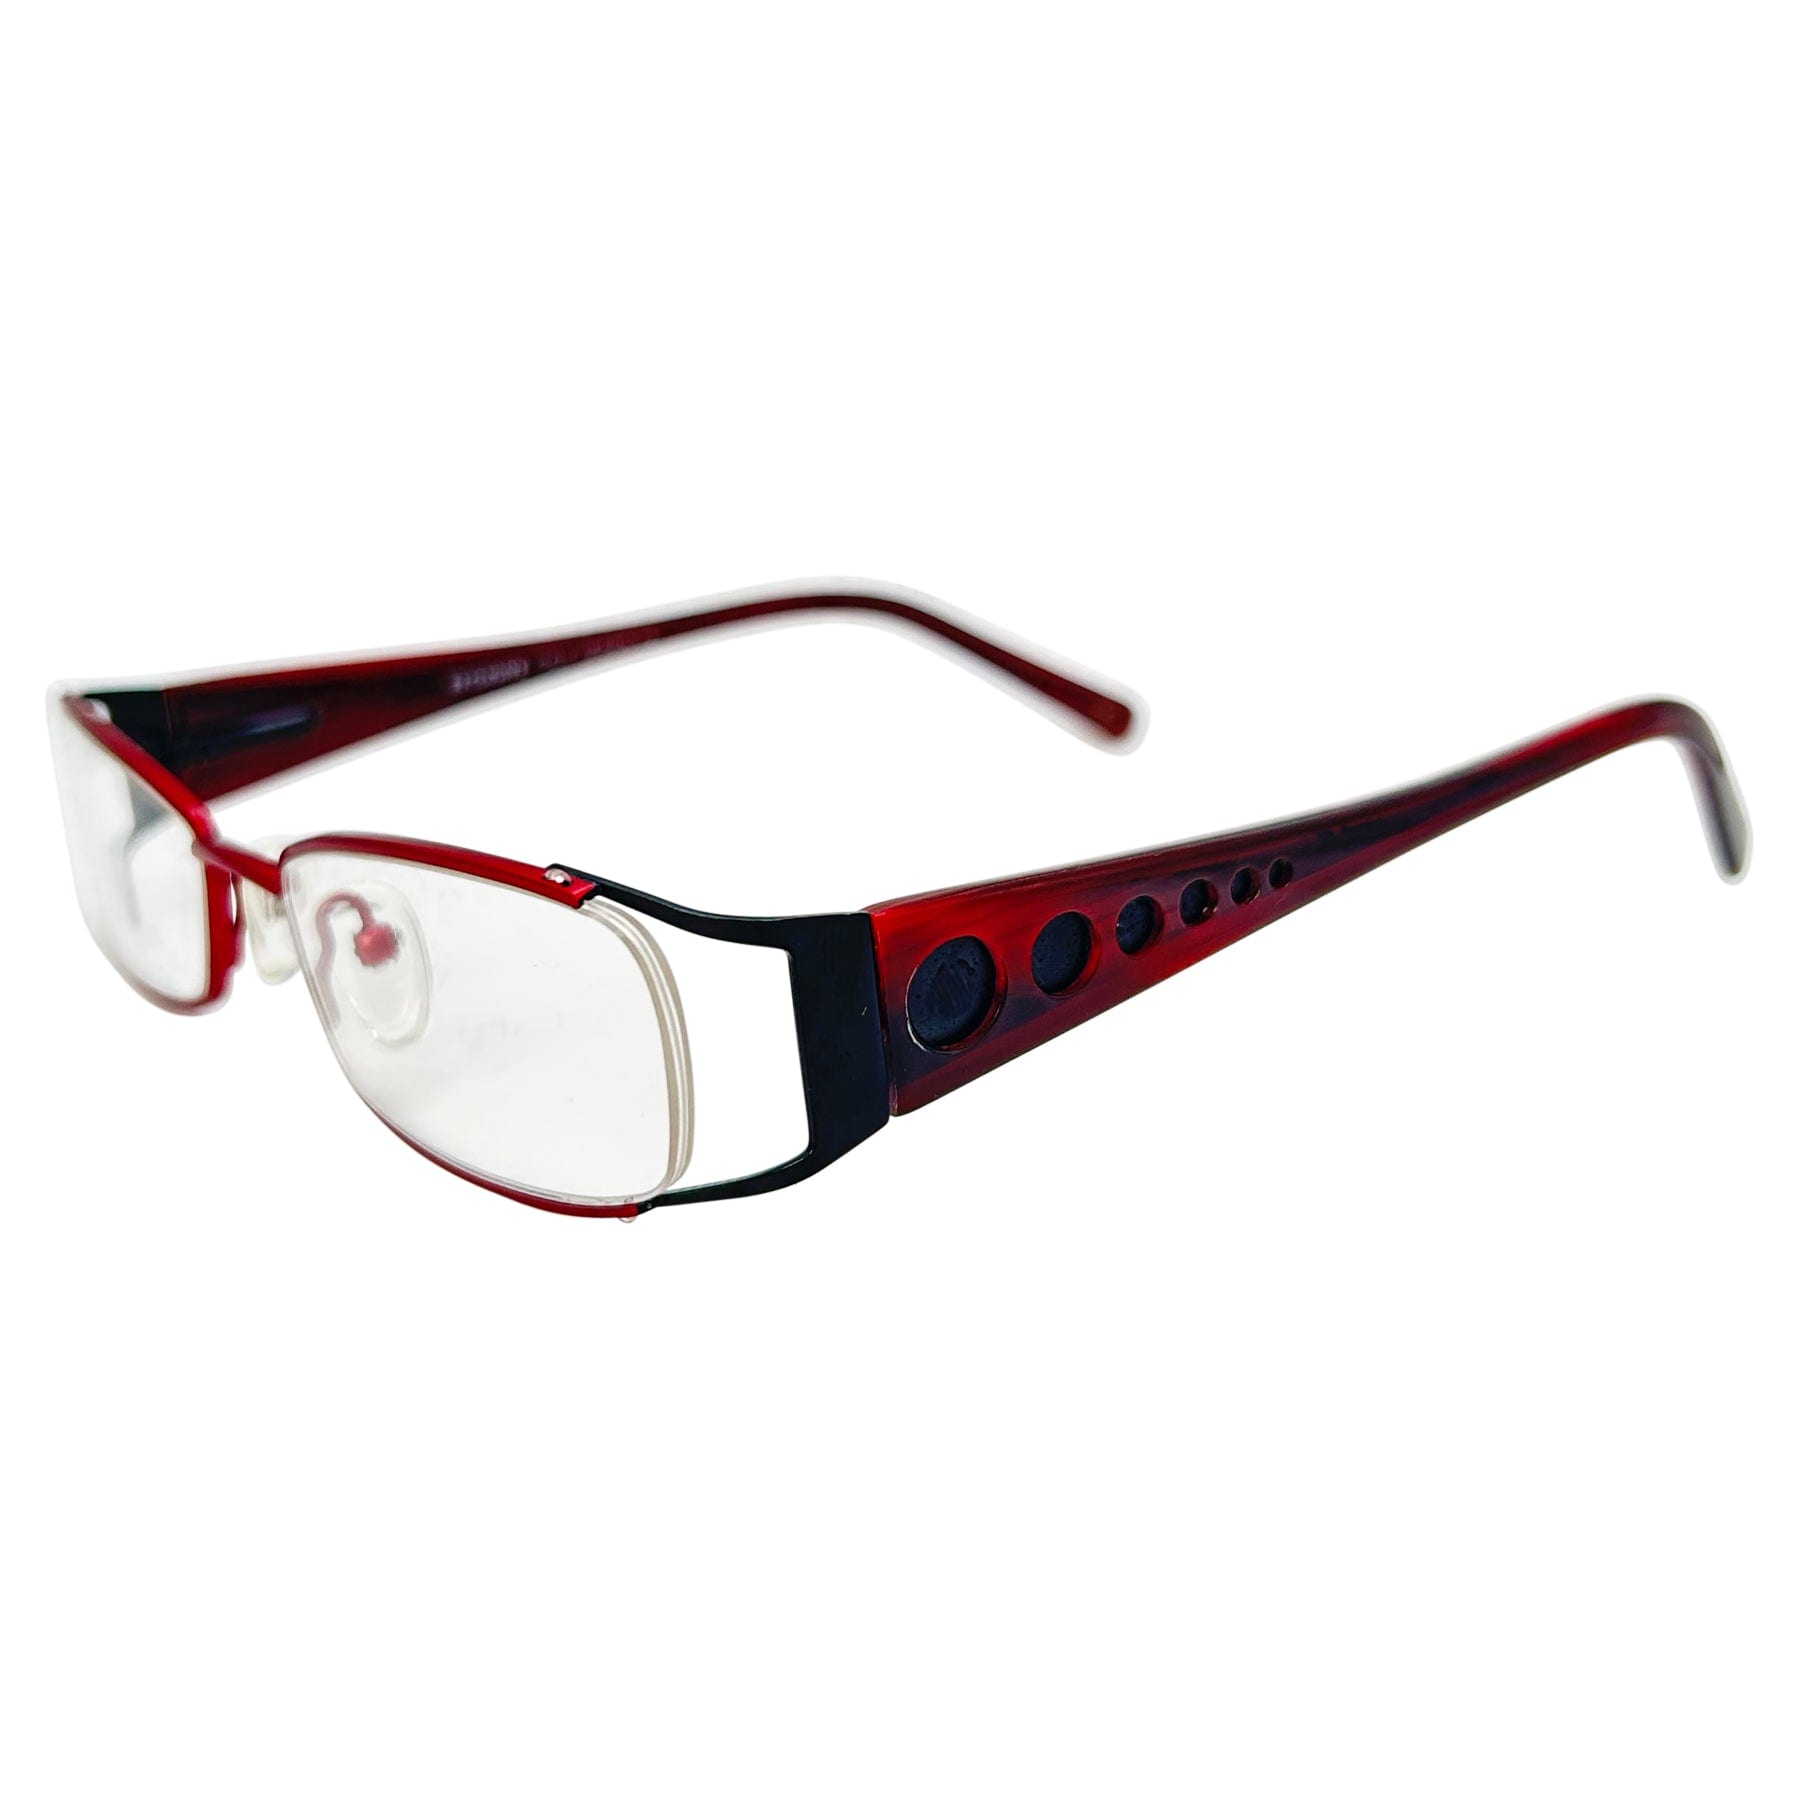 red colored glasses with a 90s vintage style frame